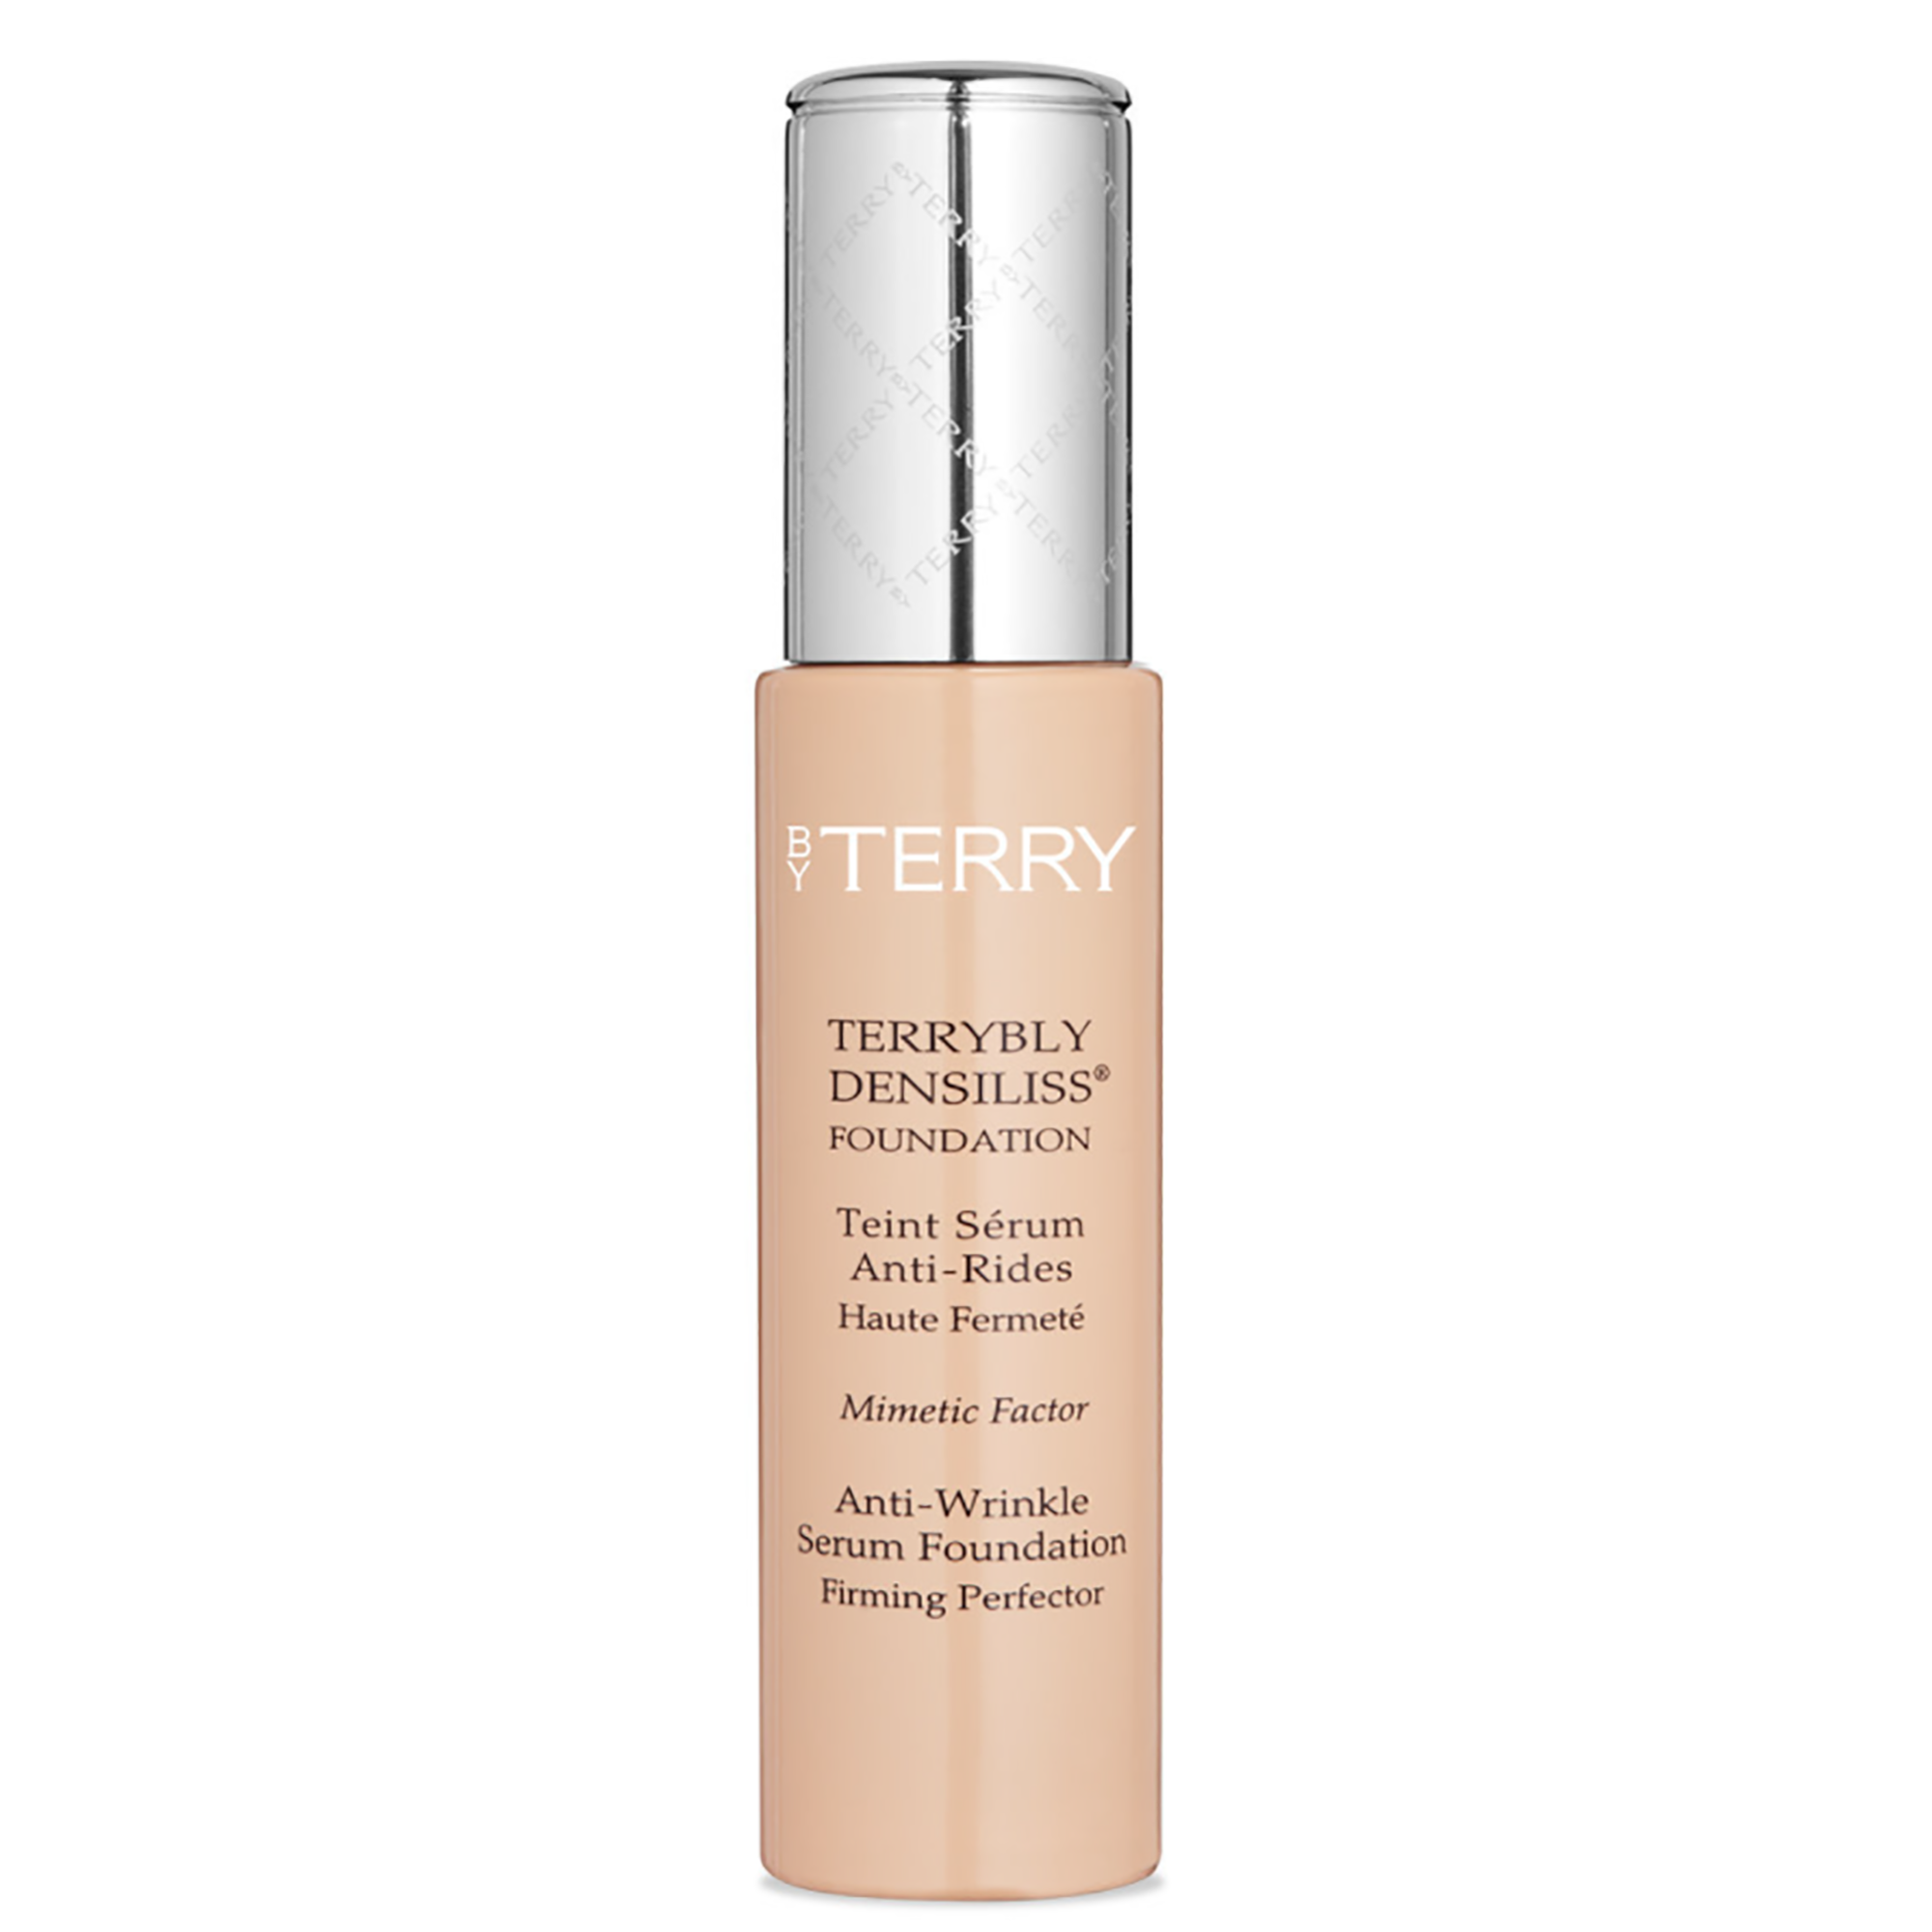 By Terry Terrybly Densiliss Anti-Wrinkle Serum Foundation #8.5 Sienna Copper